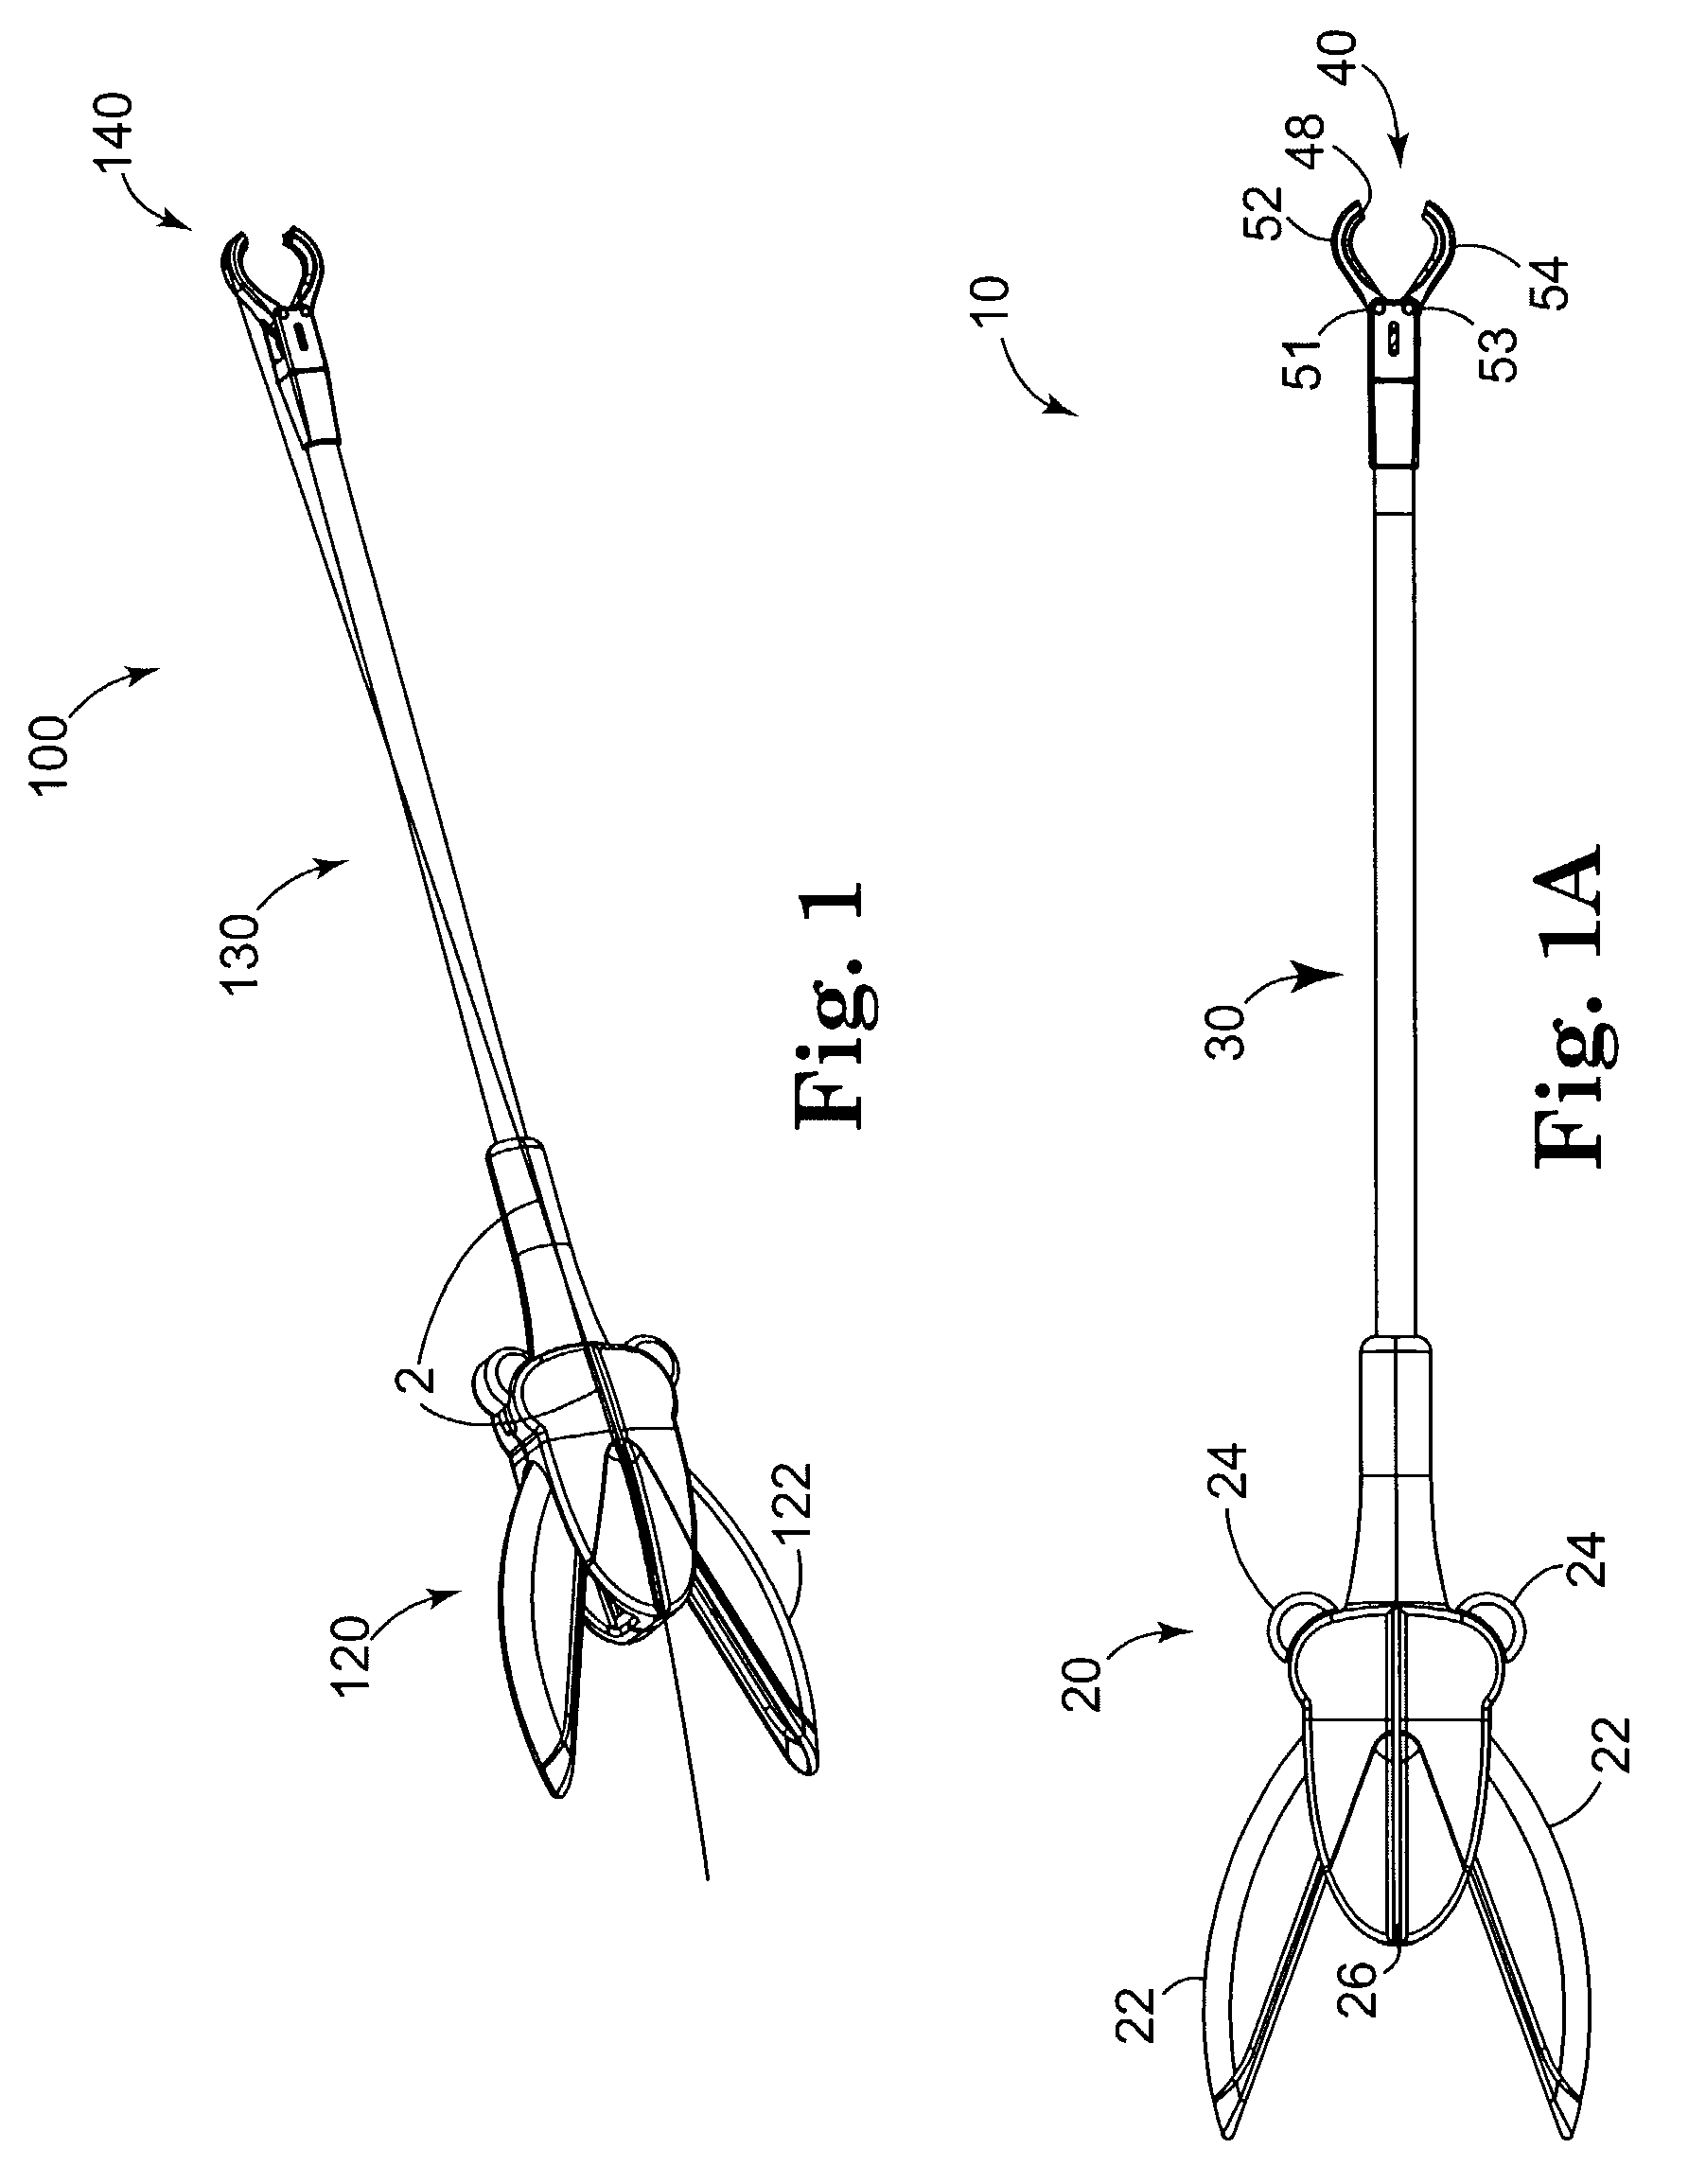 Surgical suture passers and methods